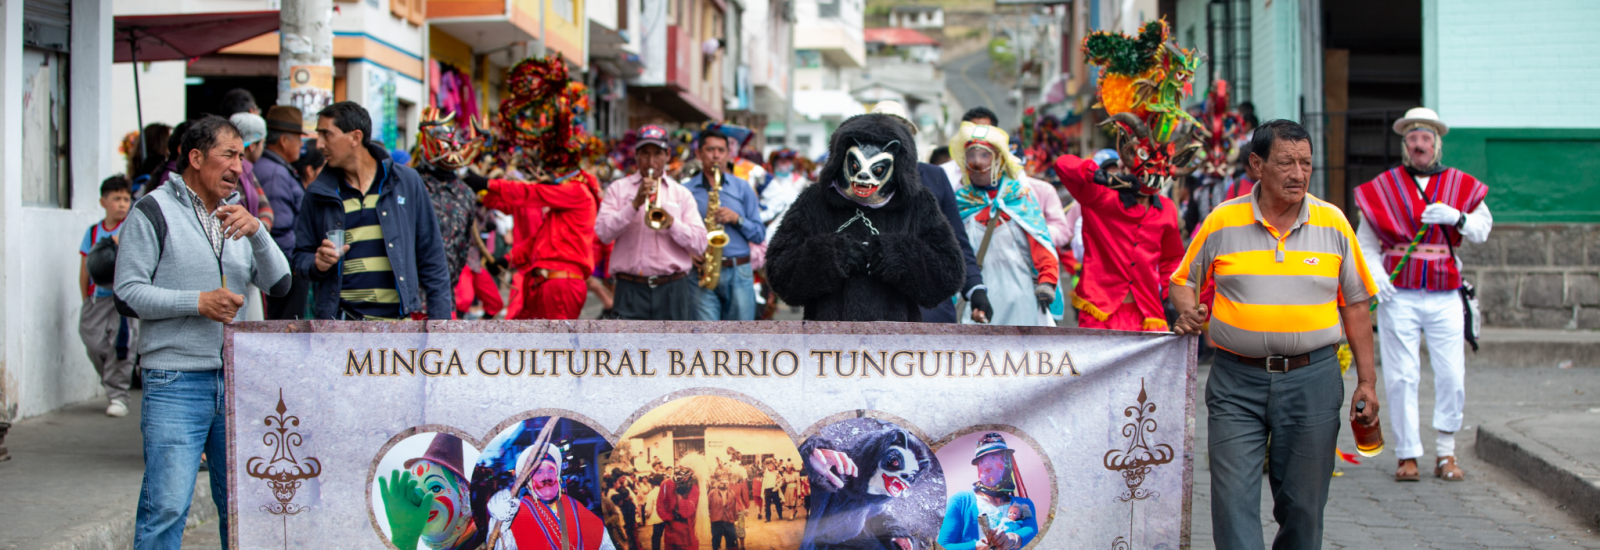 Parade of People in Masks